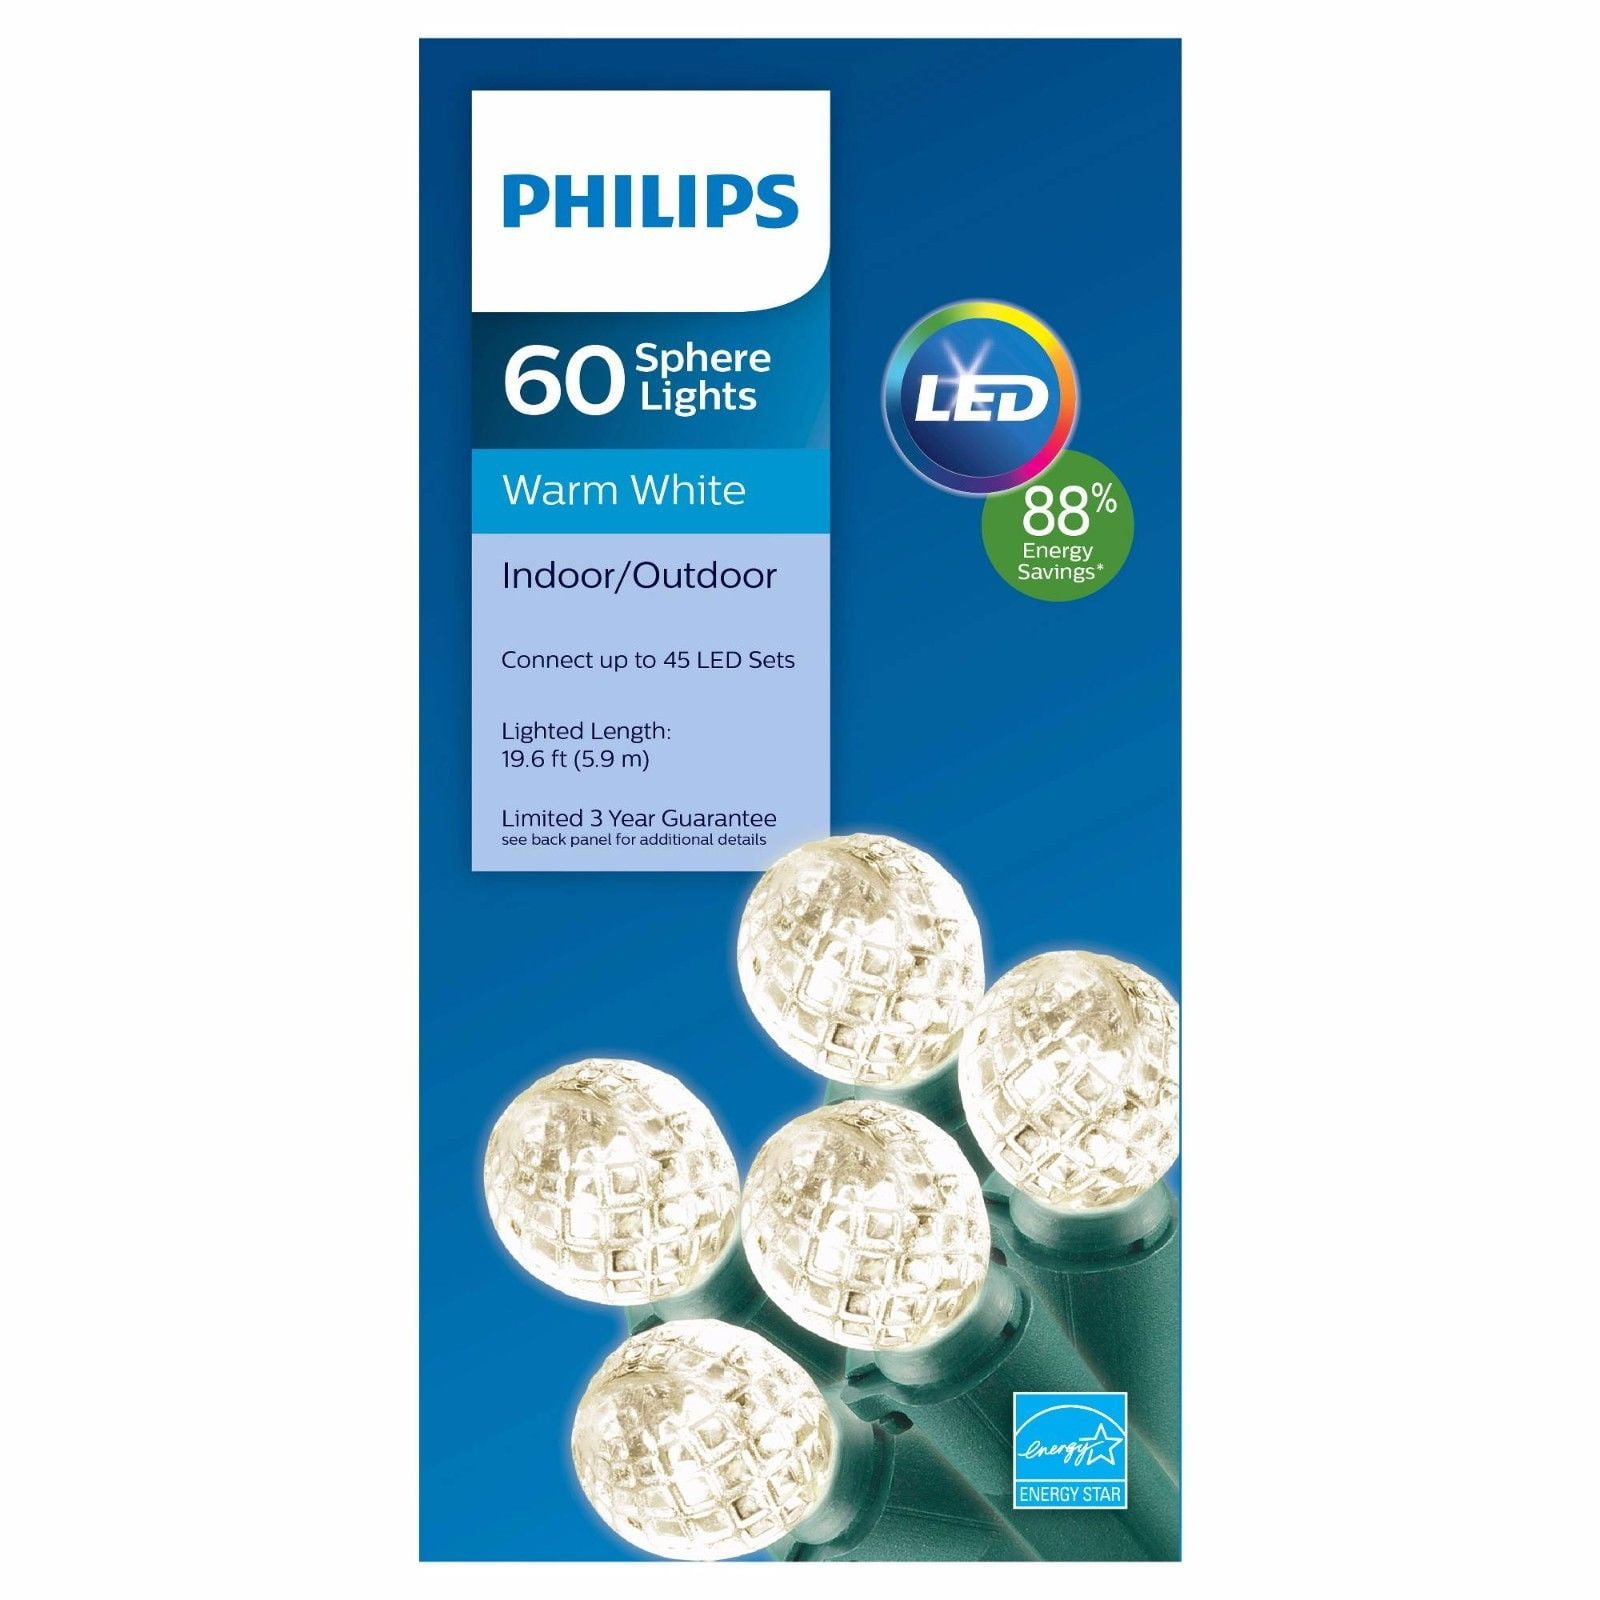 Philips Indoor Outdoor 60 Cool White Sphere C2 LED Lights BRAND NEW! 